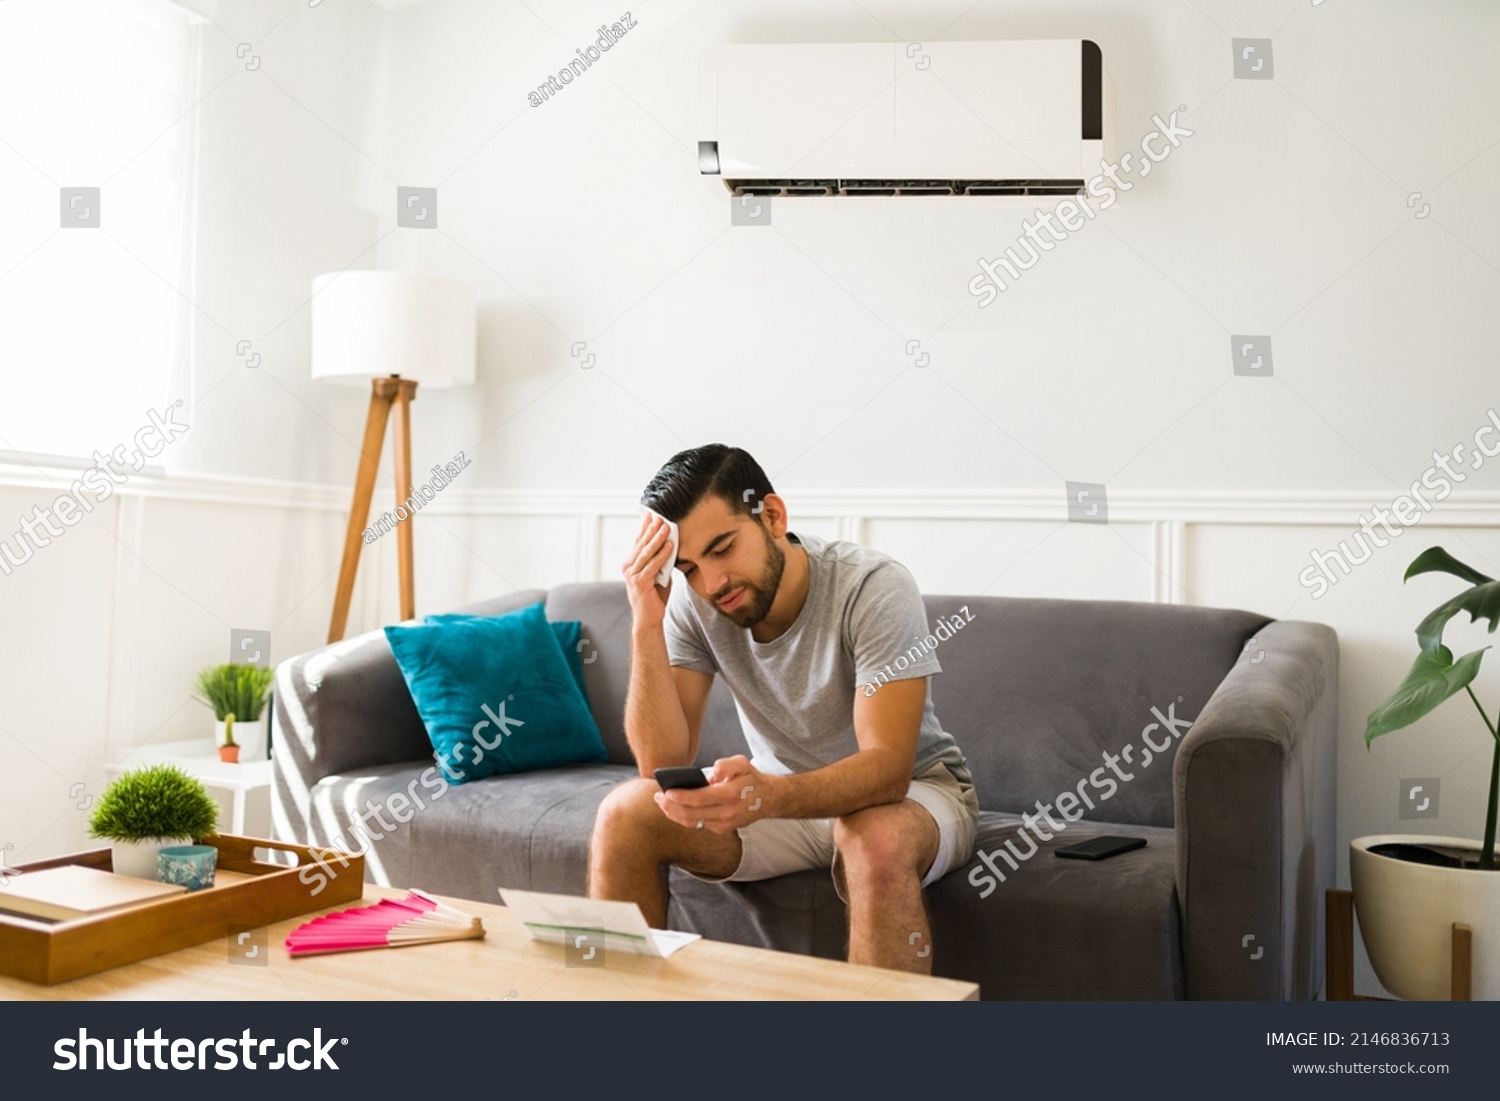 Upset man sweating during a heat wave in the summer while at home with a cold ac unit #2146836713